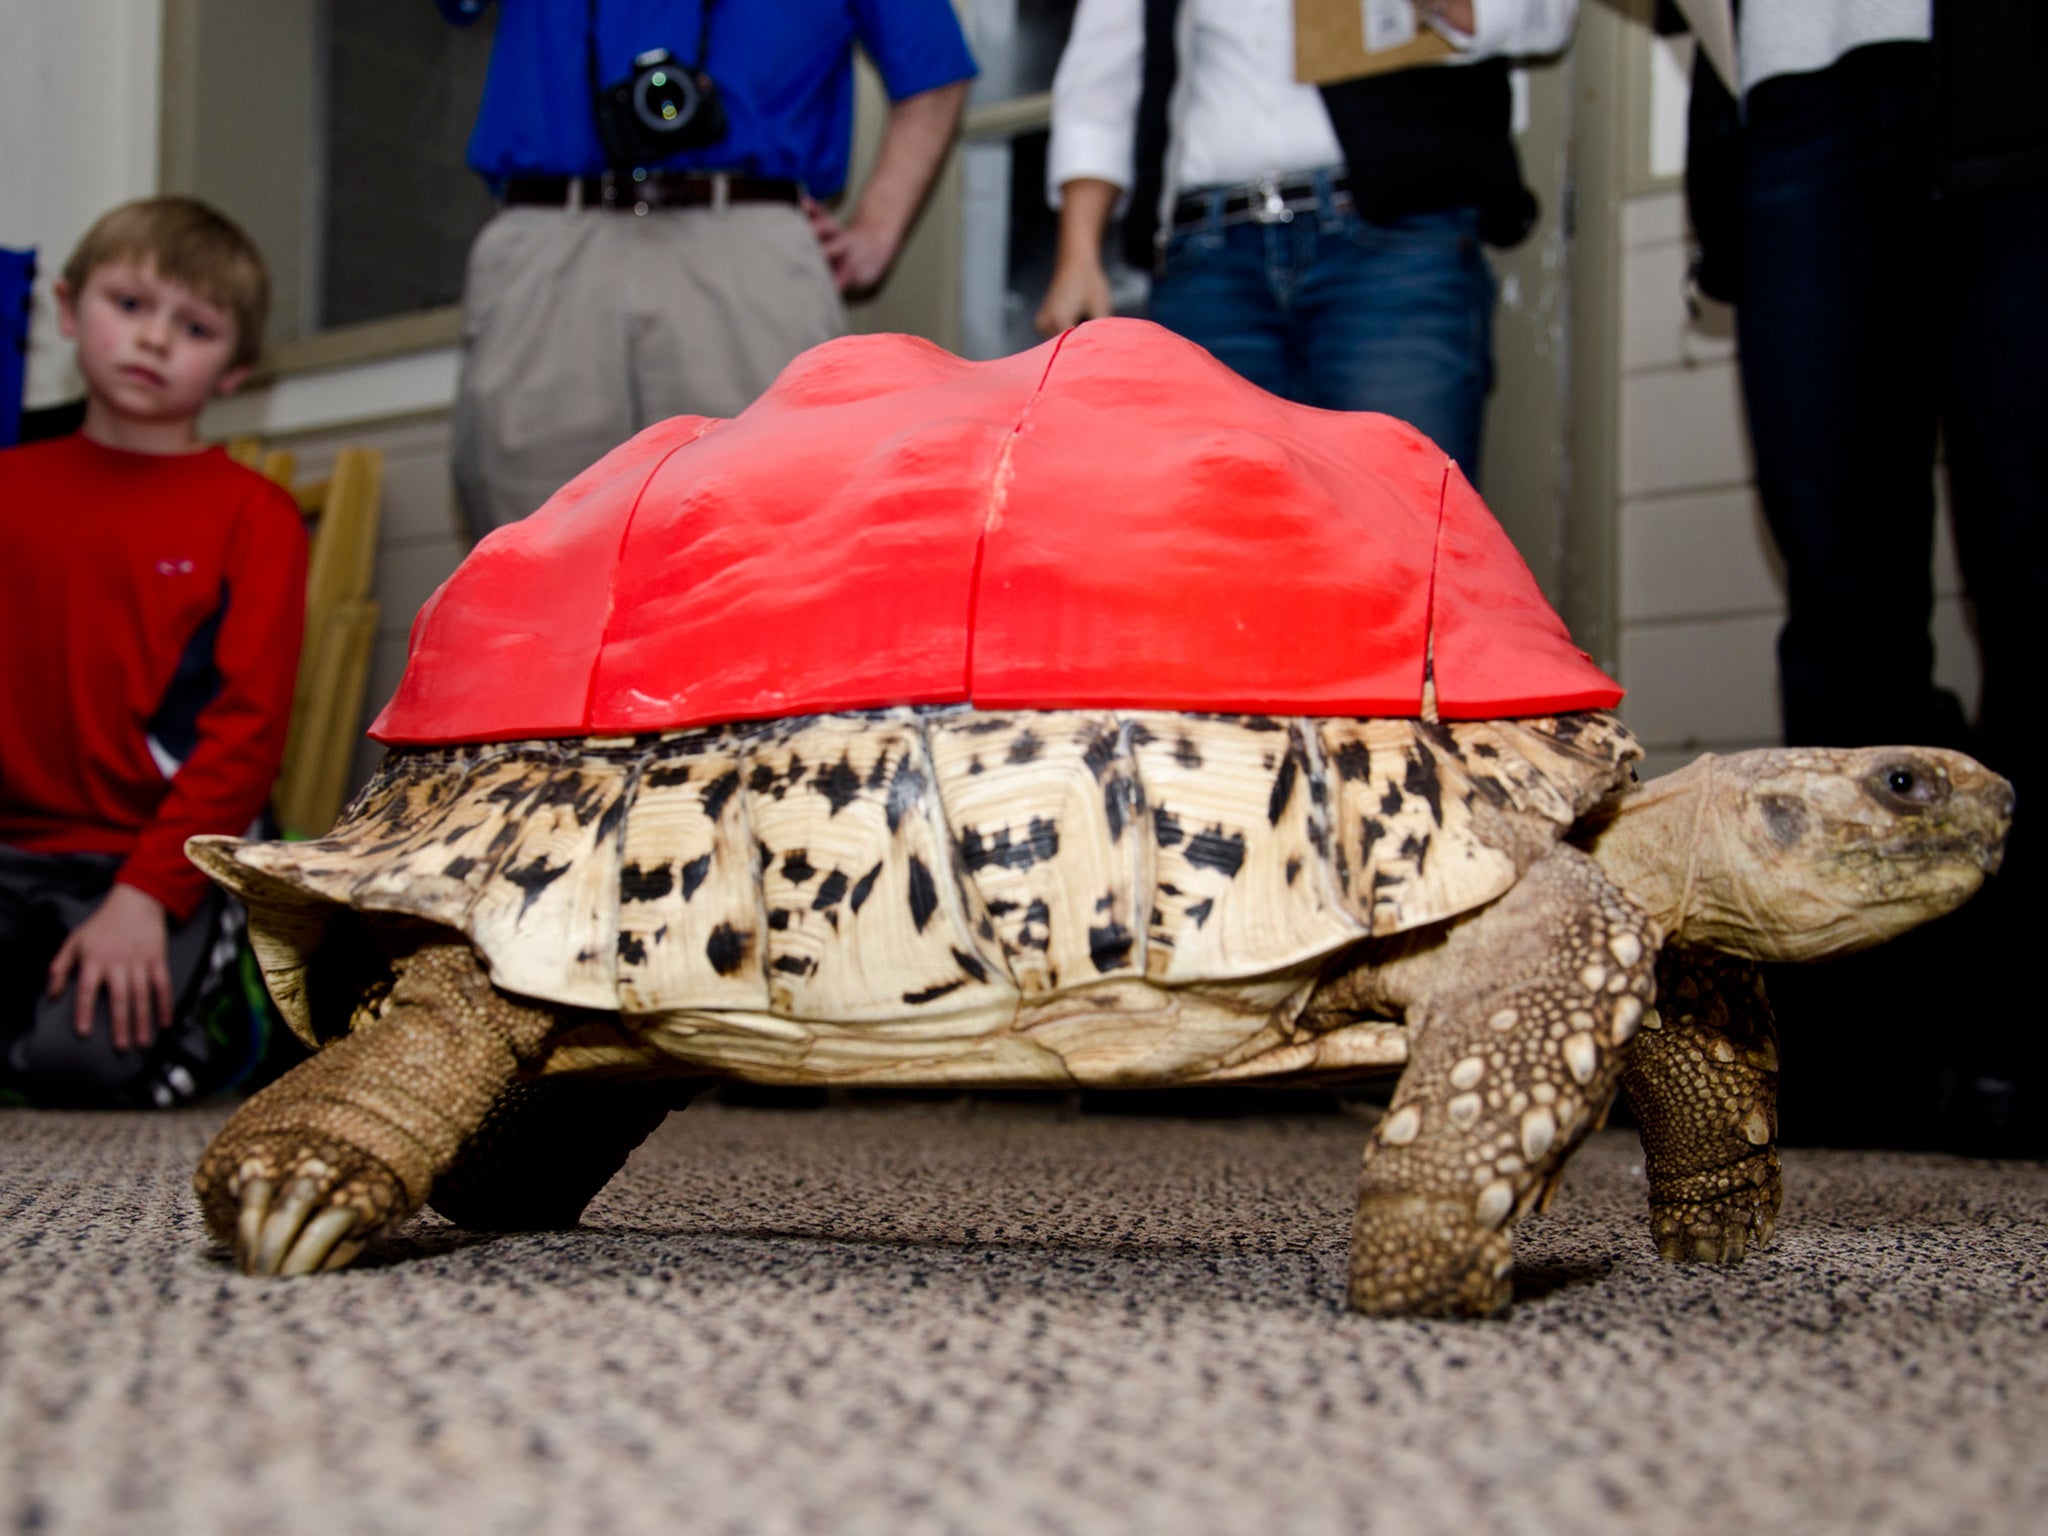 Cleopatra the tortoise suffers from a painful disease that causes her shell to disintegrate; her new prosthetic one has been custom-made for her using 3D printing technology